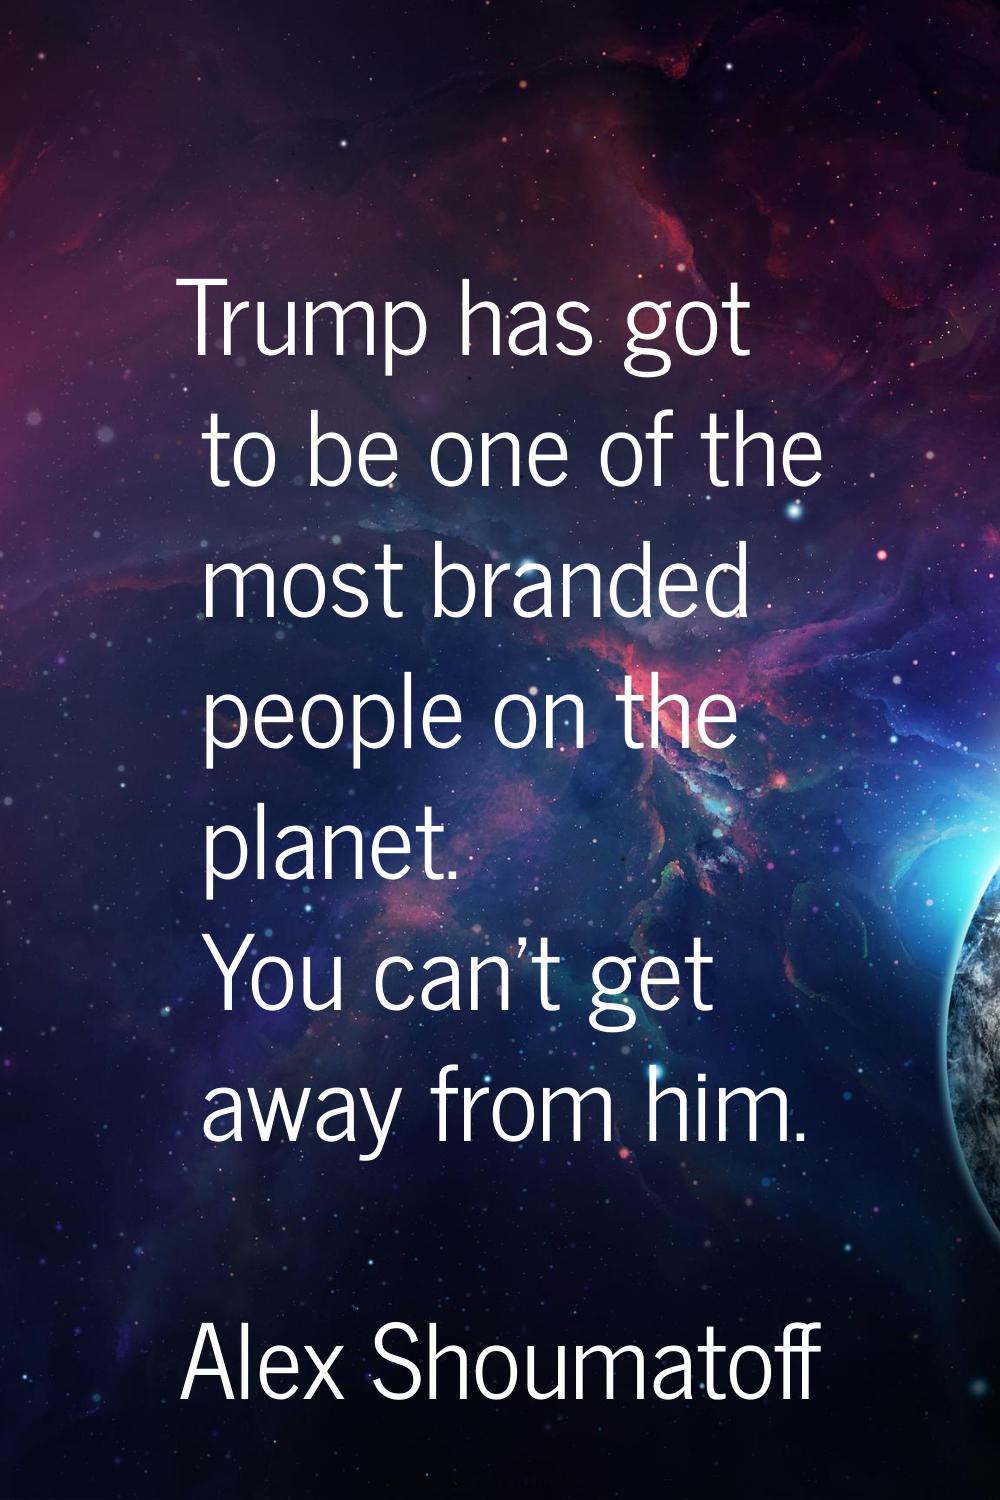 Trump has got to be one of the most branded people on the planet. You can't get away from him.